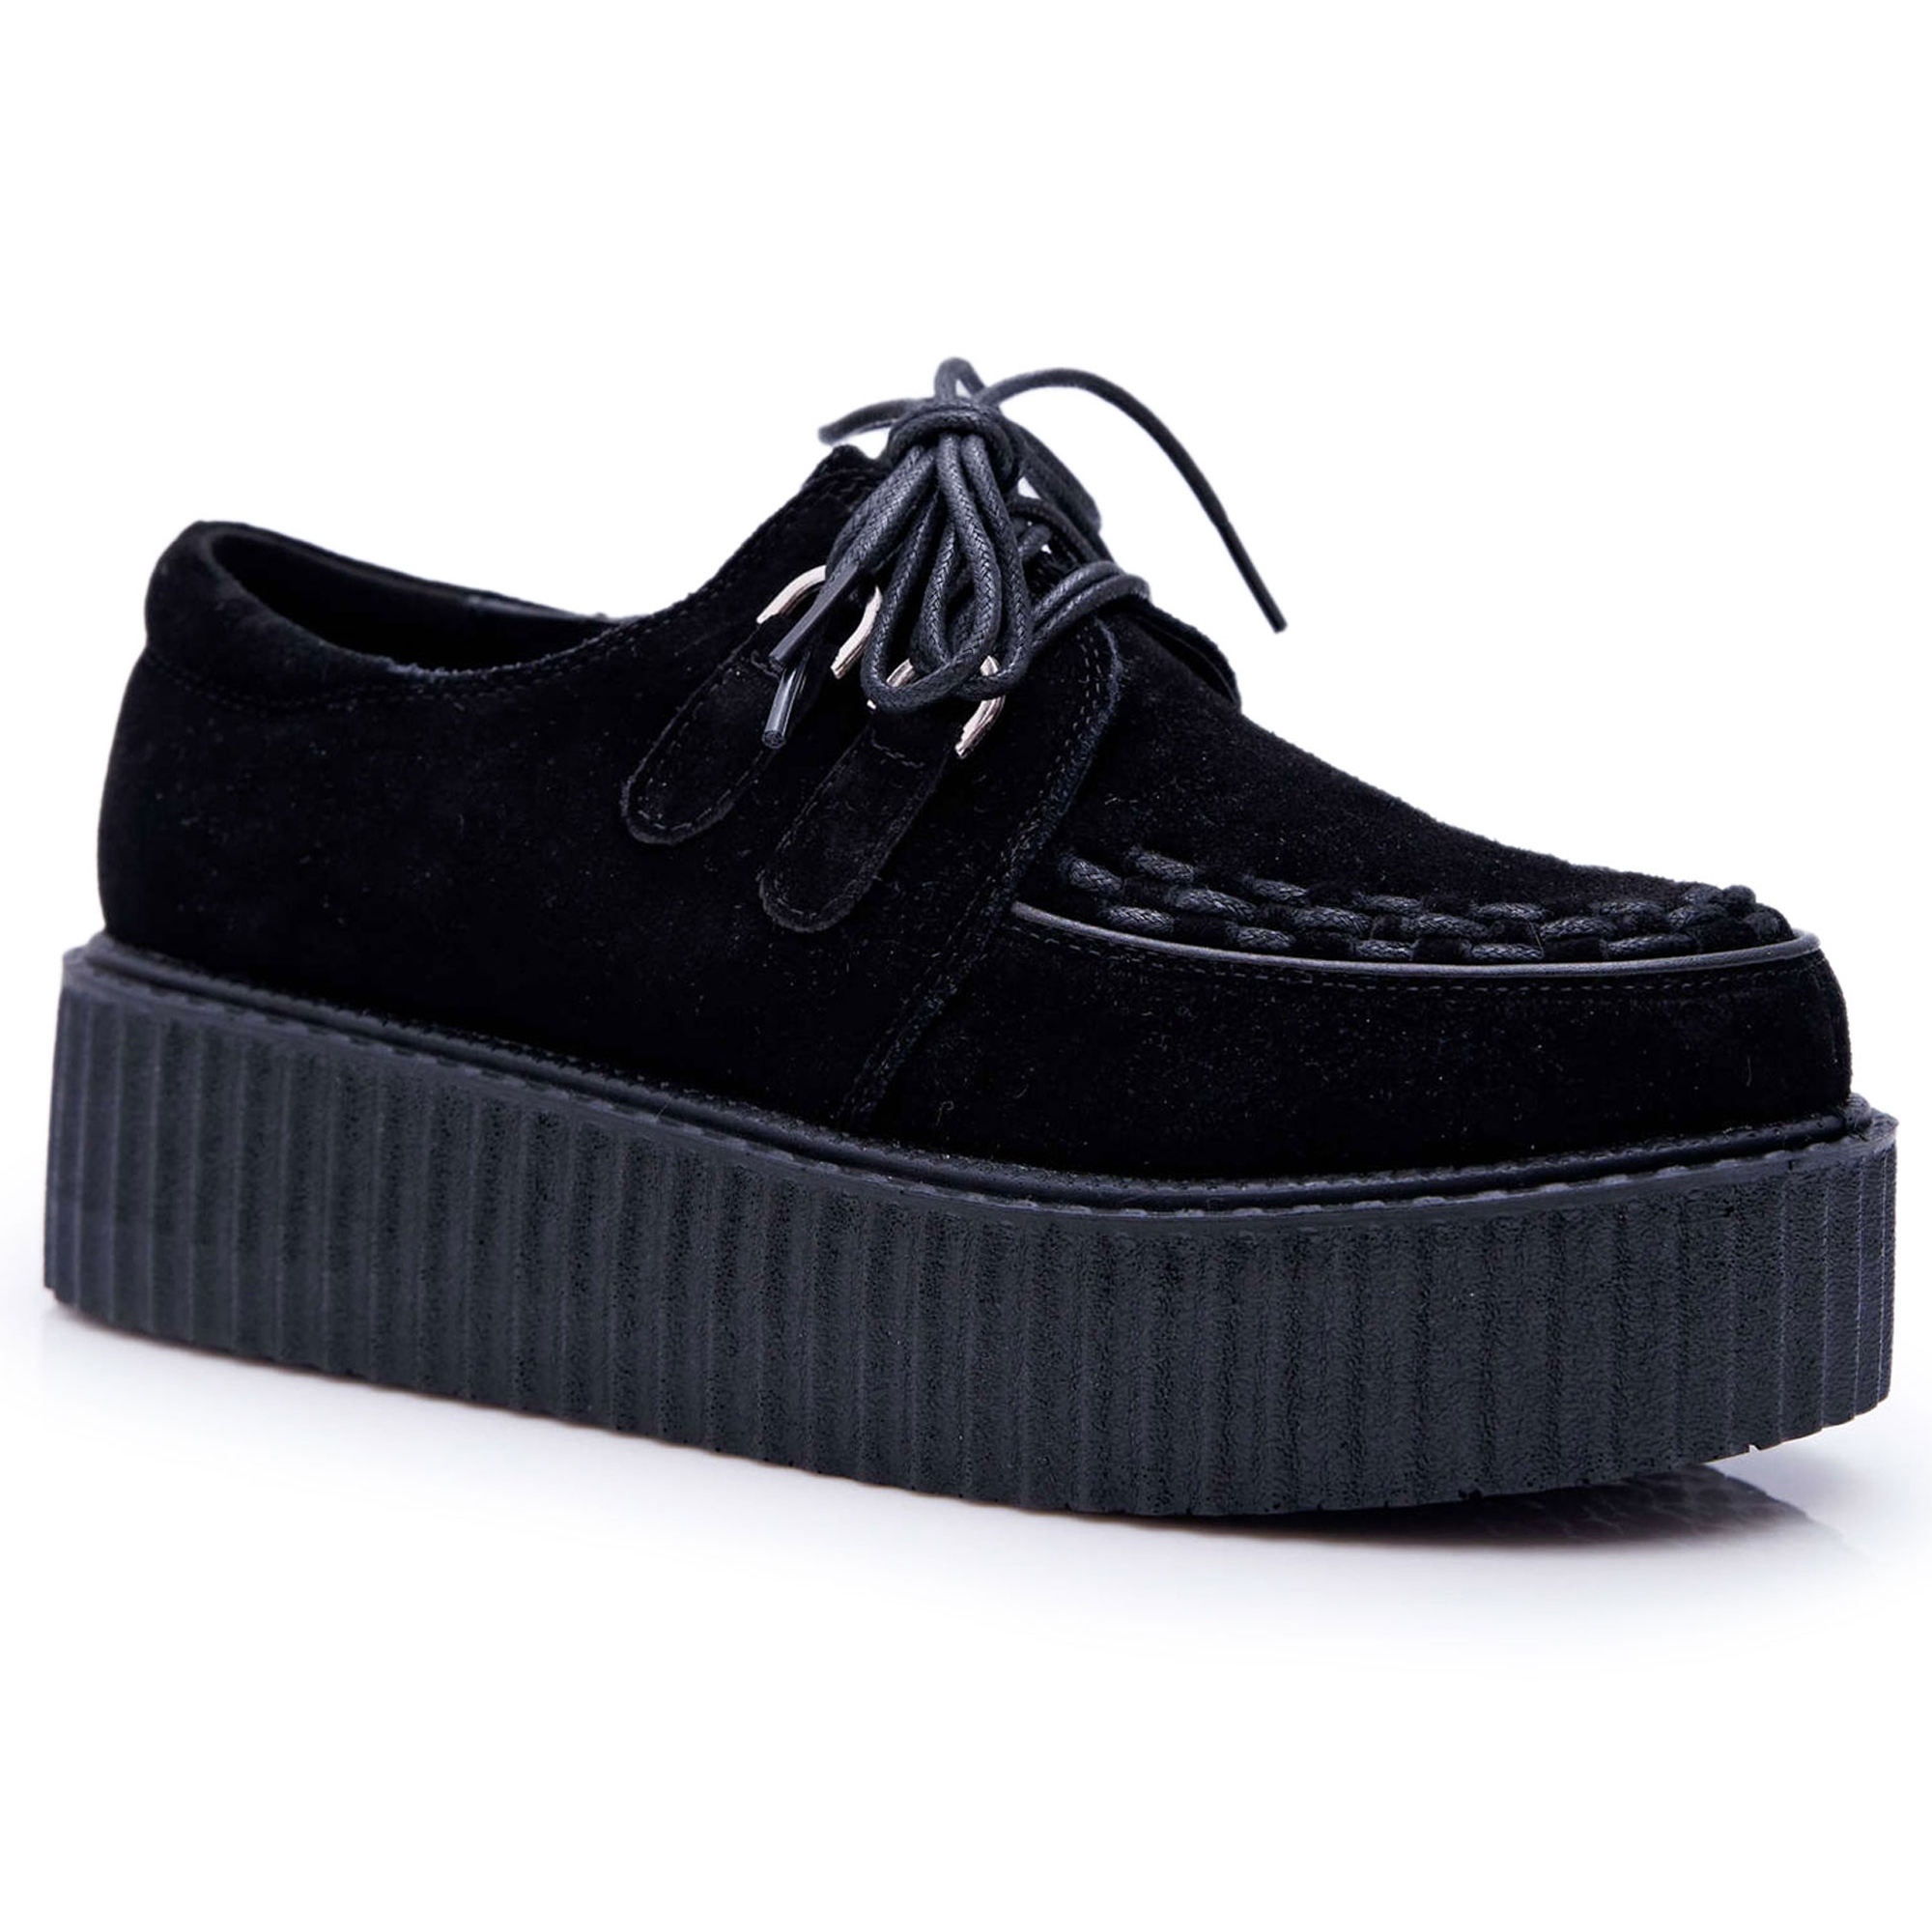 Smith's Black Suede Creepers on the Gocain Platform